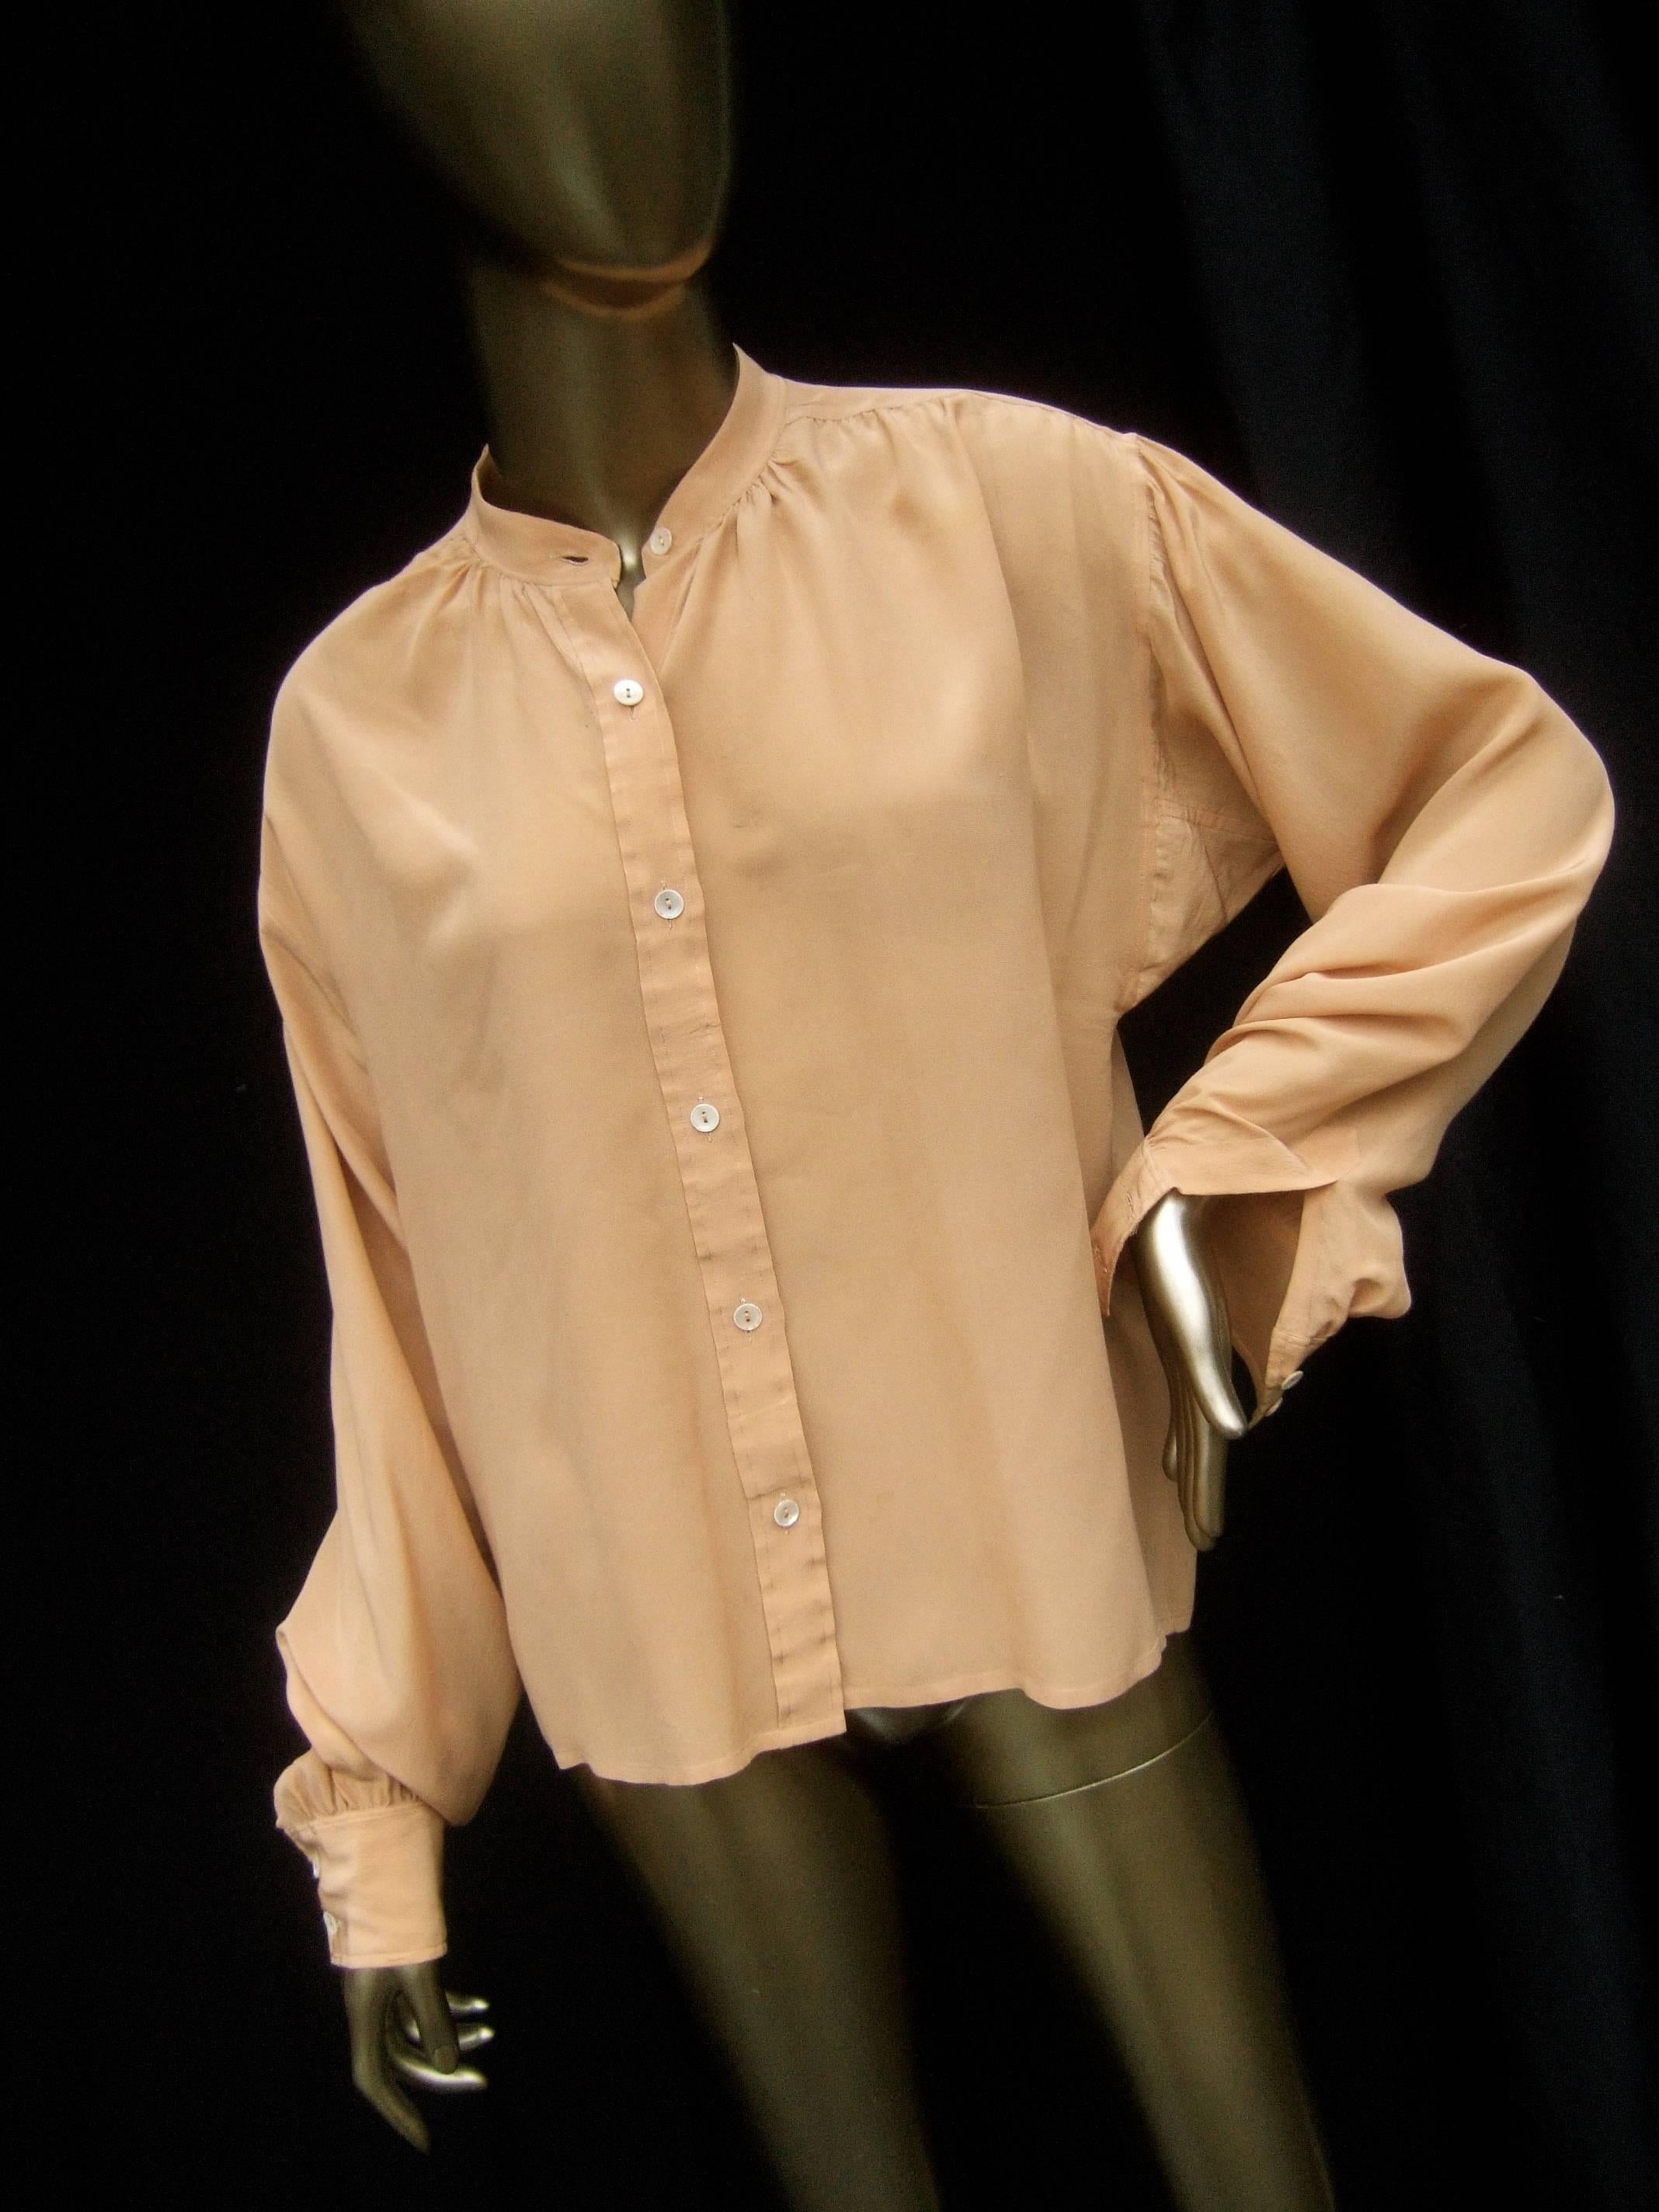 Saint Laurent Rive Gauche peach silk blouse c 1970s
The elegant peach color silk blouse is designed 
with a Nehru style stand up collar 

A series of tiny lucite buttons run down the front 
The sleeve cuffs have subtle pleated detail 
Makes an